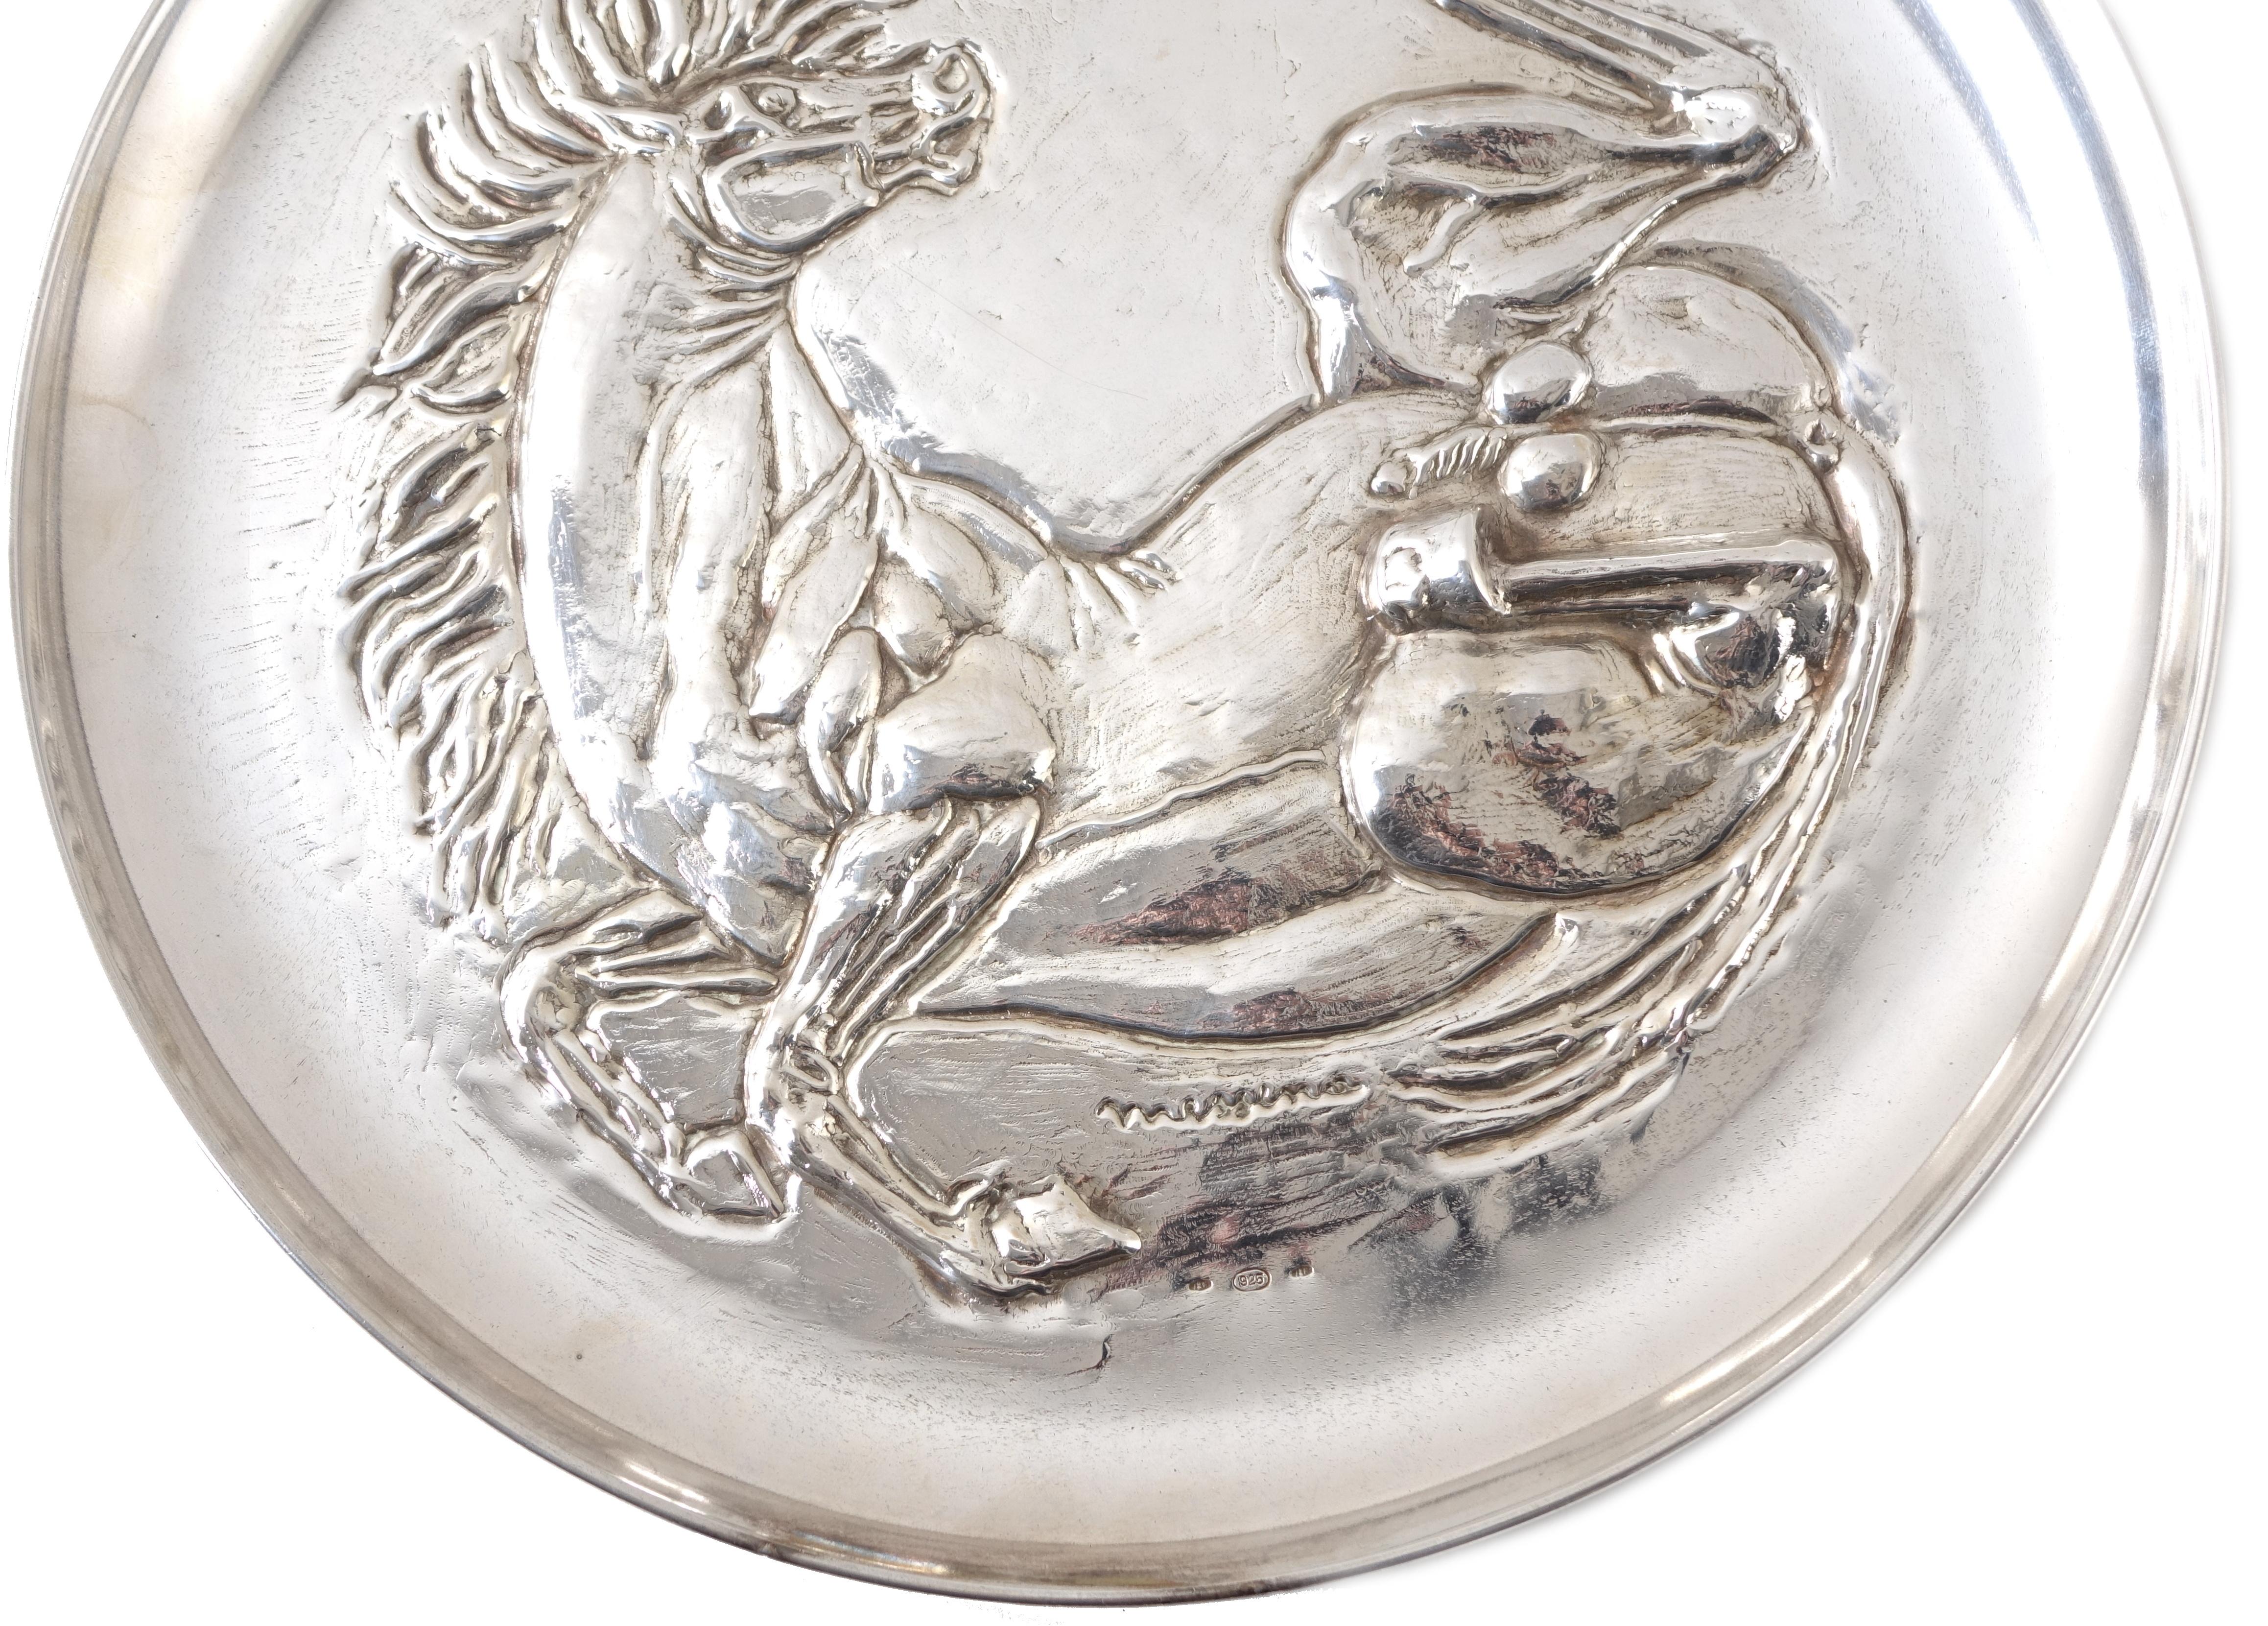 This silver was given by Messina to one of our customers who told us he had
received from the hands of Messina with the phrase it will bring good luck to those who own it ...
Sculptor Francesco Messina was born on 15 December 1900 in Linguaglossa,